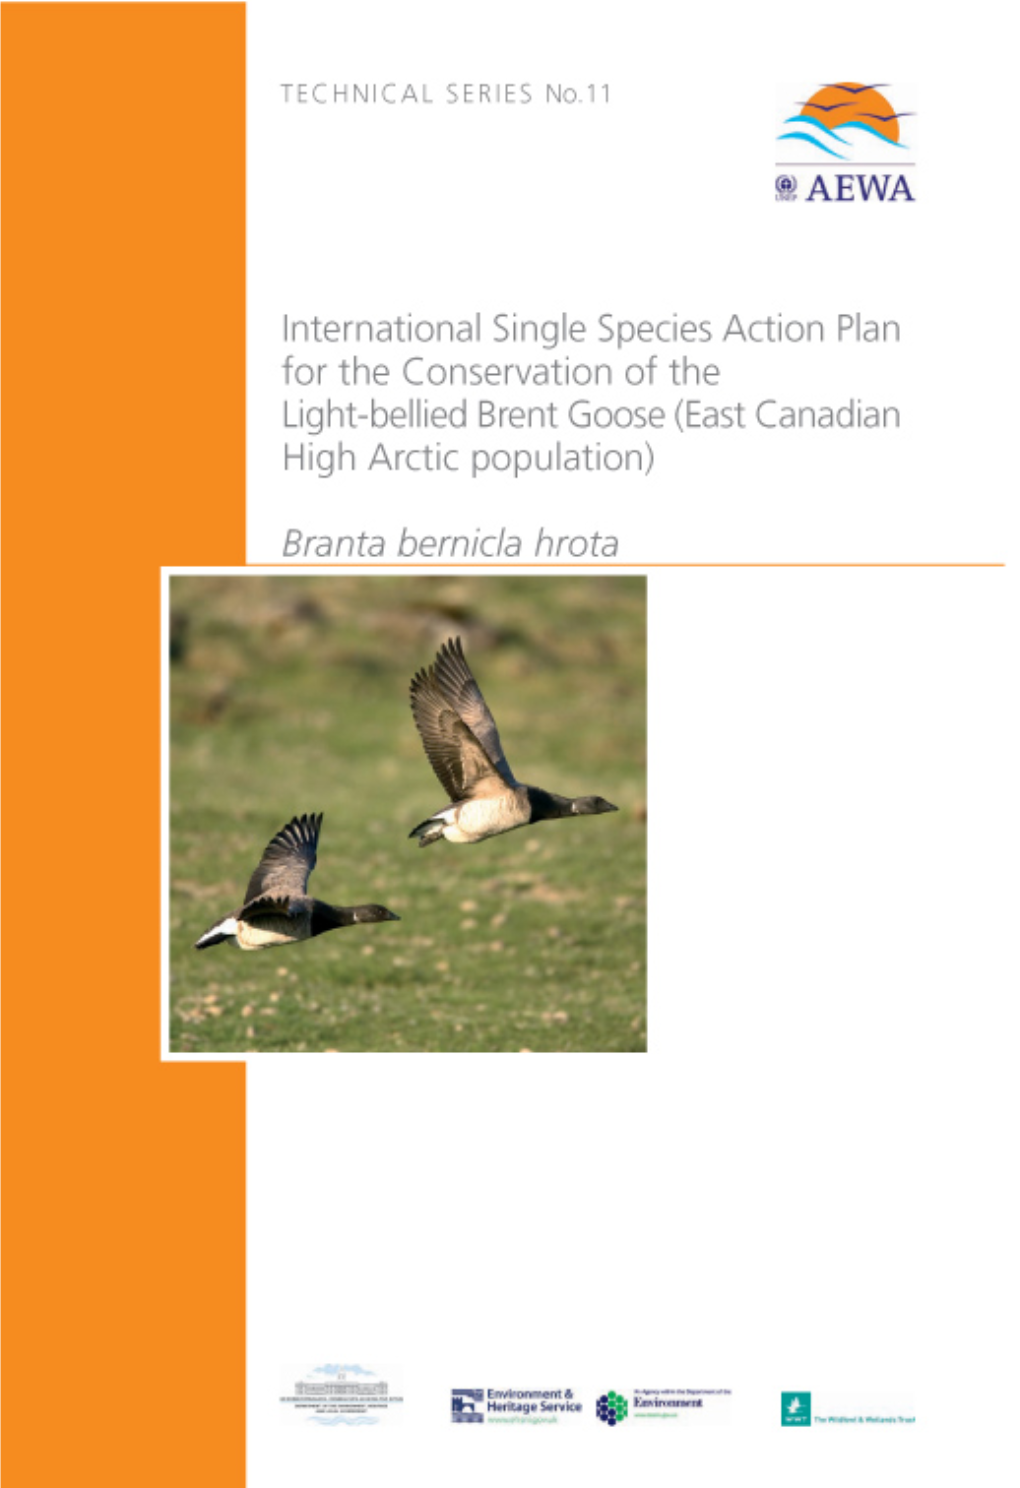 International Single Species Action Plan for the Conservation of the Light-Bellied Brent Goose (East Canadian High Arctic Population)